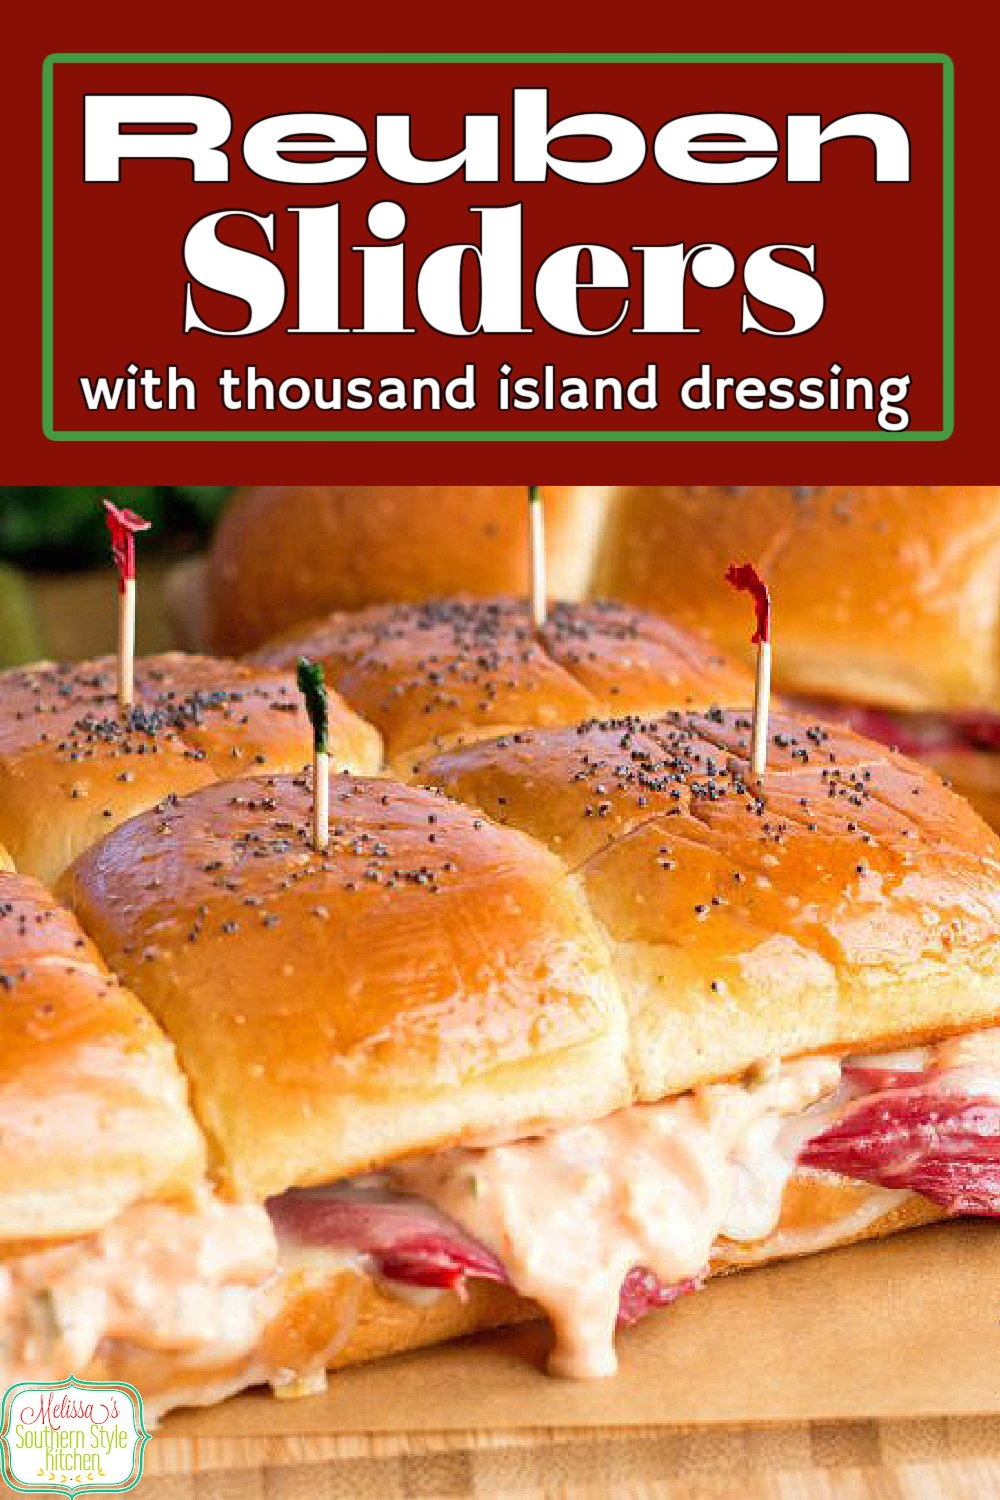 These mini Reuben Sliders are topped with a homemade Thousand Island dressing that's to die for! #reubensandwich #reubensliders #cornedbeef #cornedbeefrecipes #beef #partyfood #appetizers #sandwiches #thousandislanddressing #stpatricksday #stpaddys #footballfood via @melissasssk